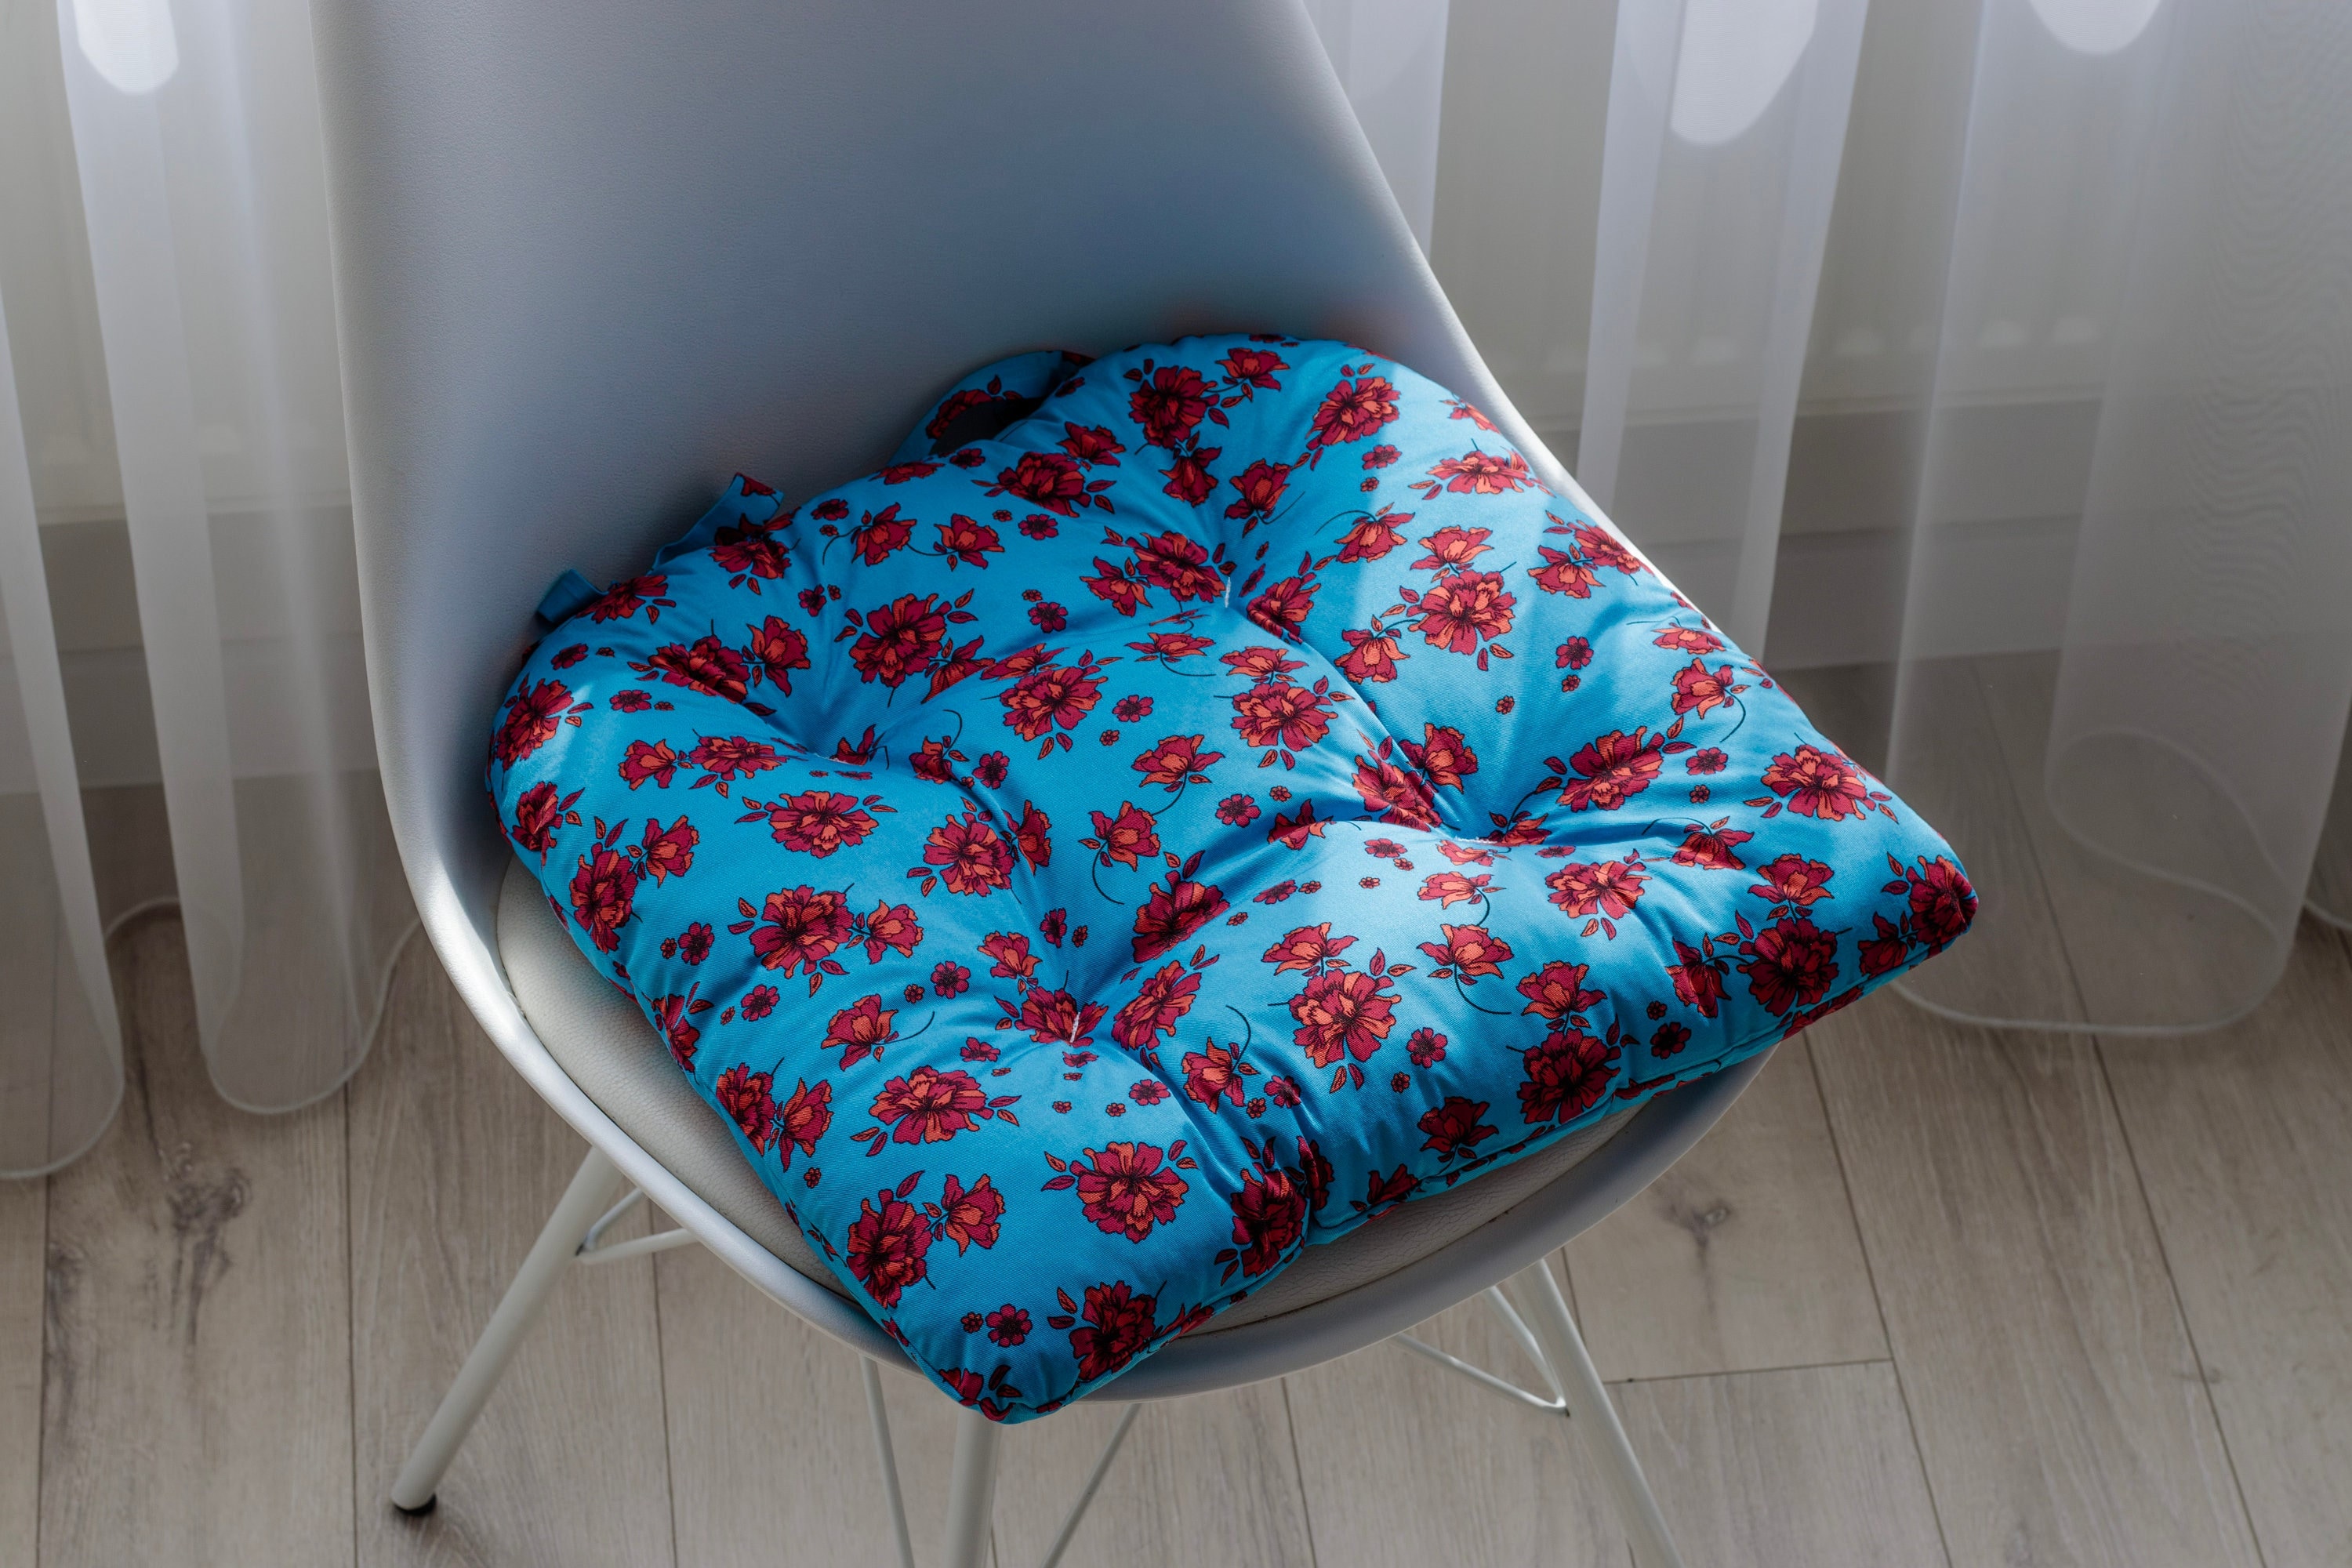 Handmade Cotton Mandala U Shaped Tuffted Thick Chair cushion pads 16''x16''  with Ties for Armchairs Dining Office Chair - Bed Bath & Beyond - 36874895